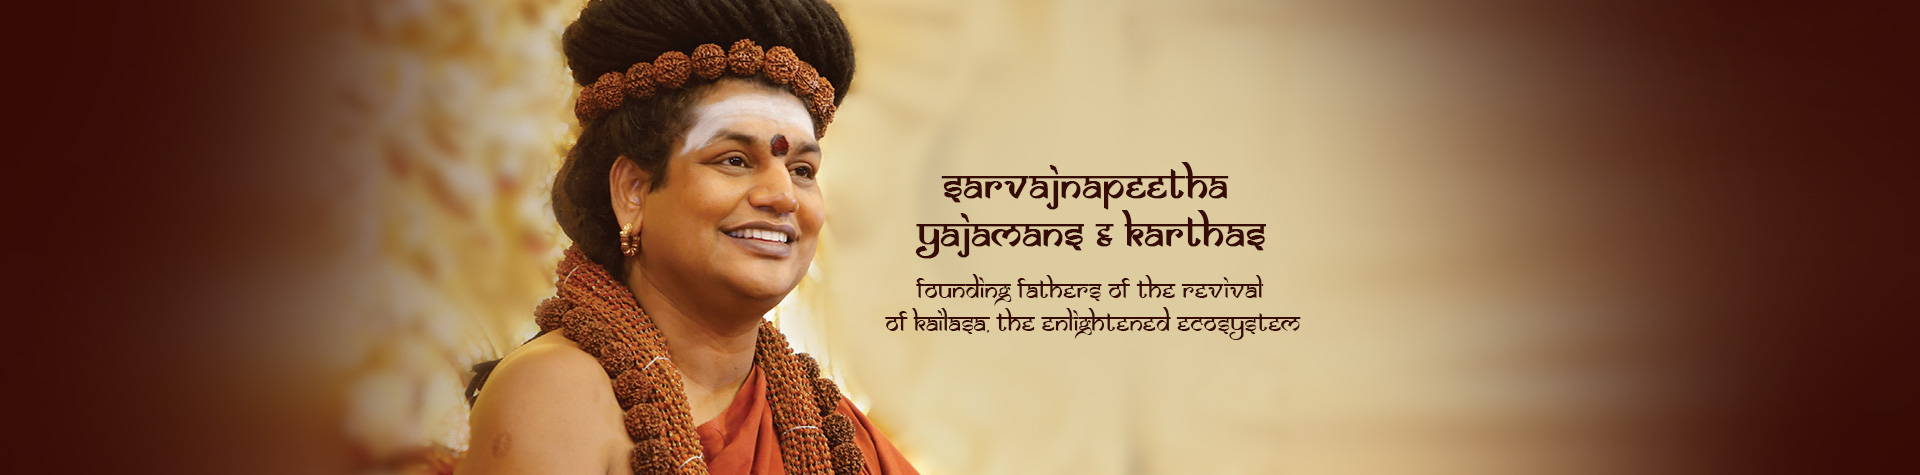 Founding fathers of the revival of Kailasa, the enlightened ecosystem